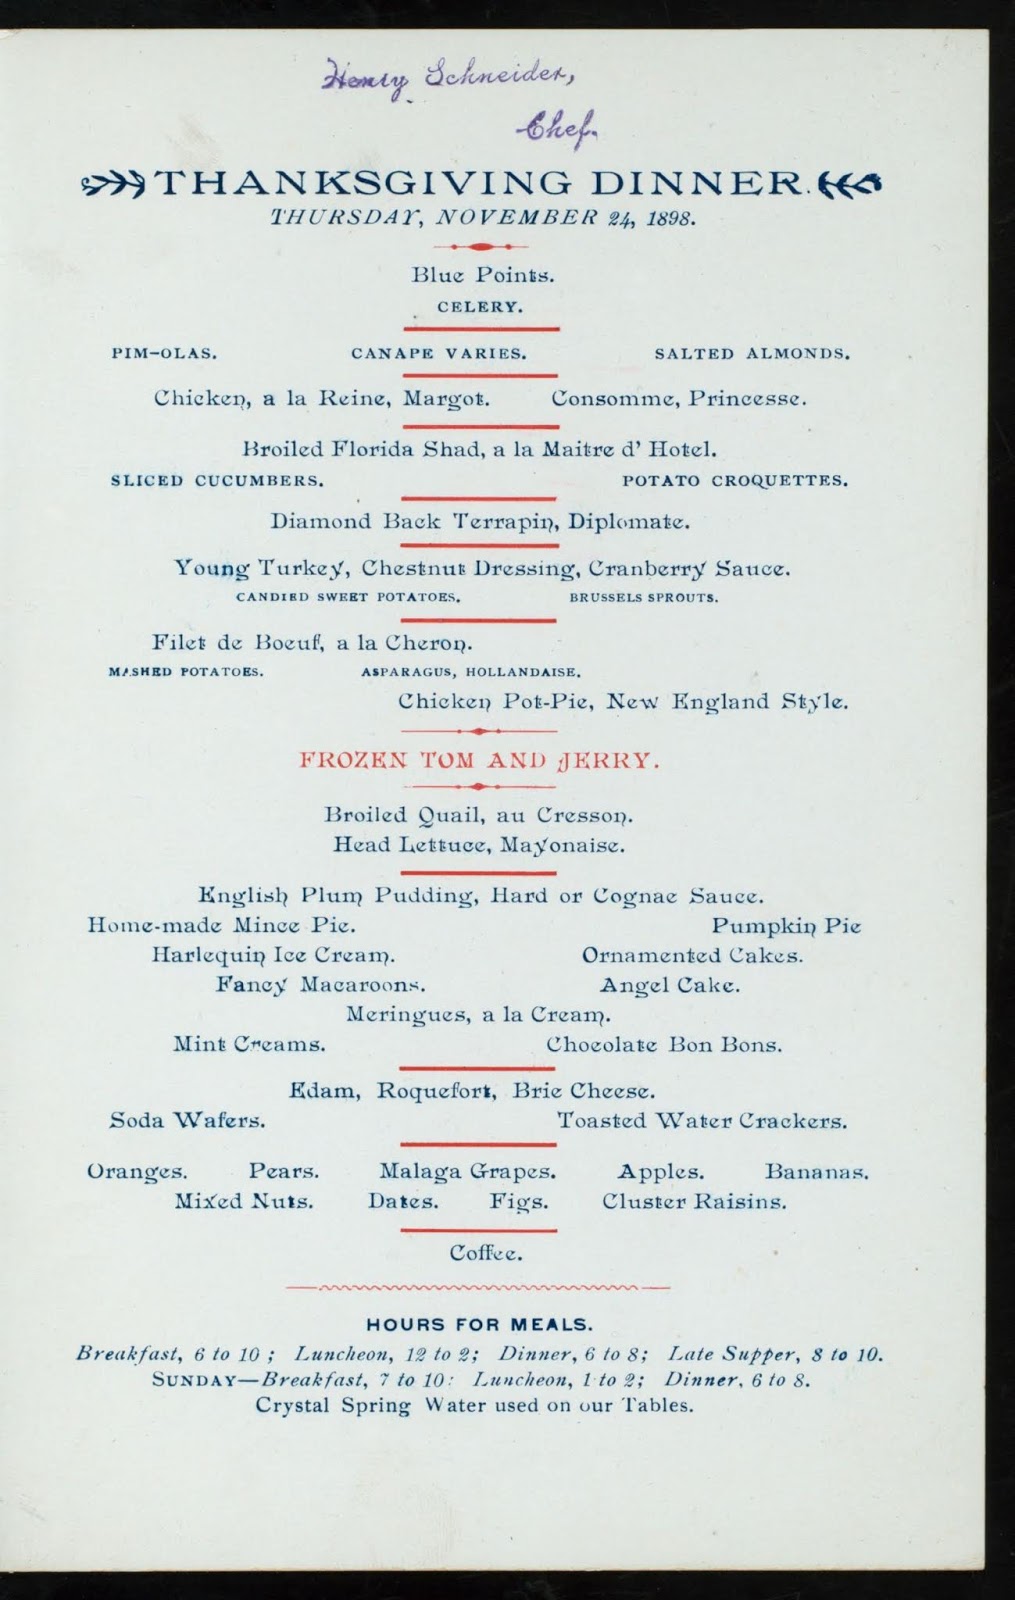 38 Vintage Thanksgiving Menus From the Late 19th Century ~ Vintage Everyday